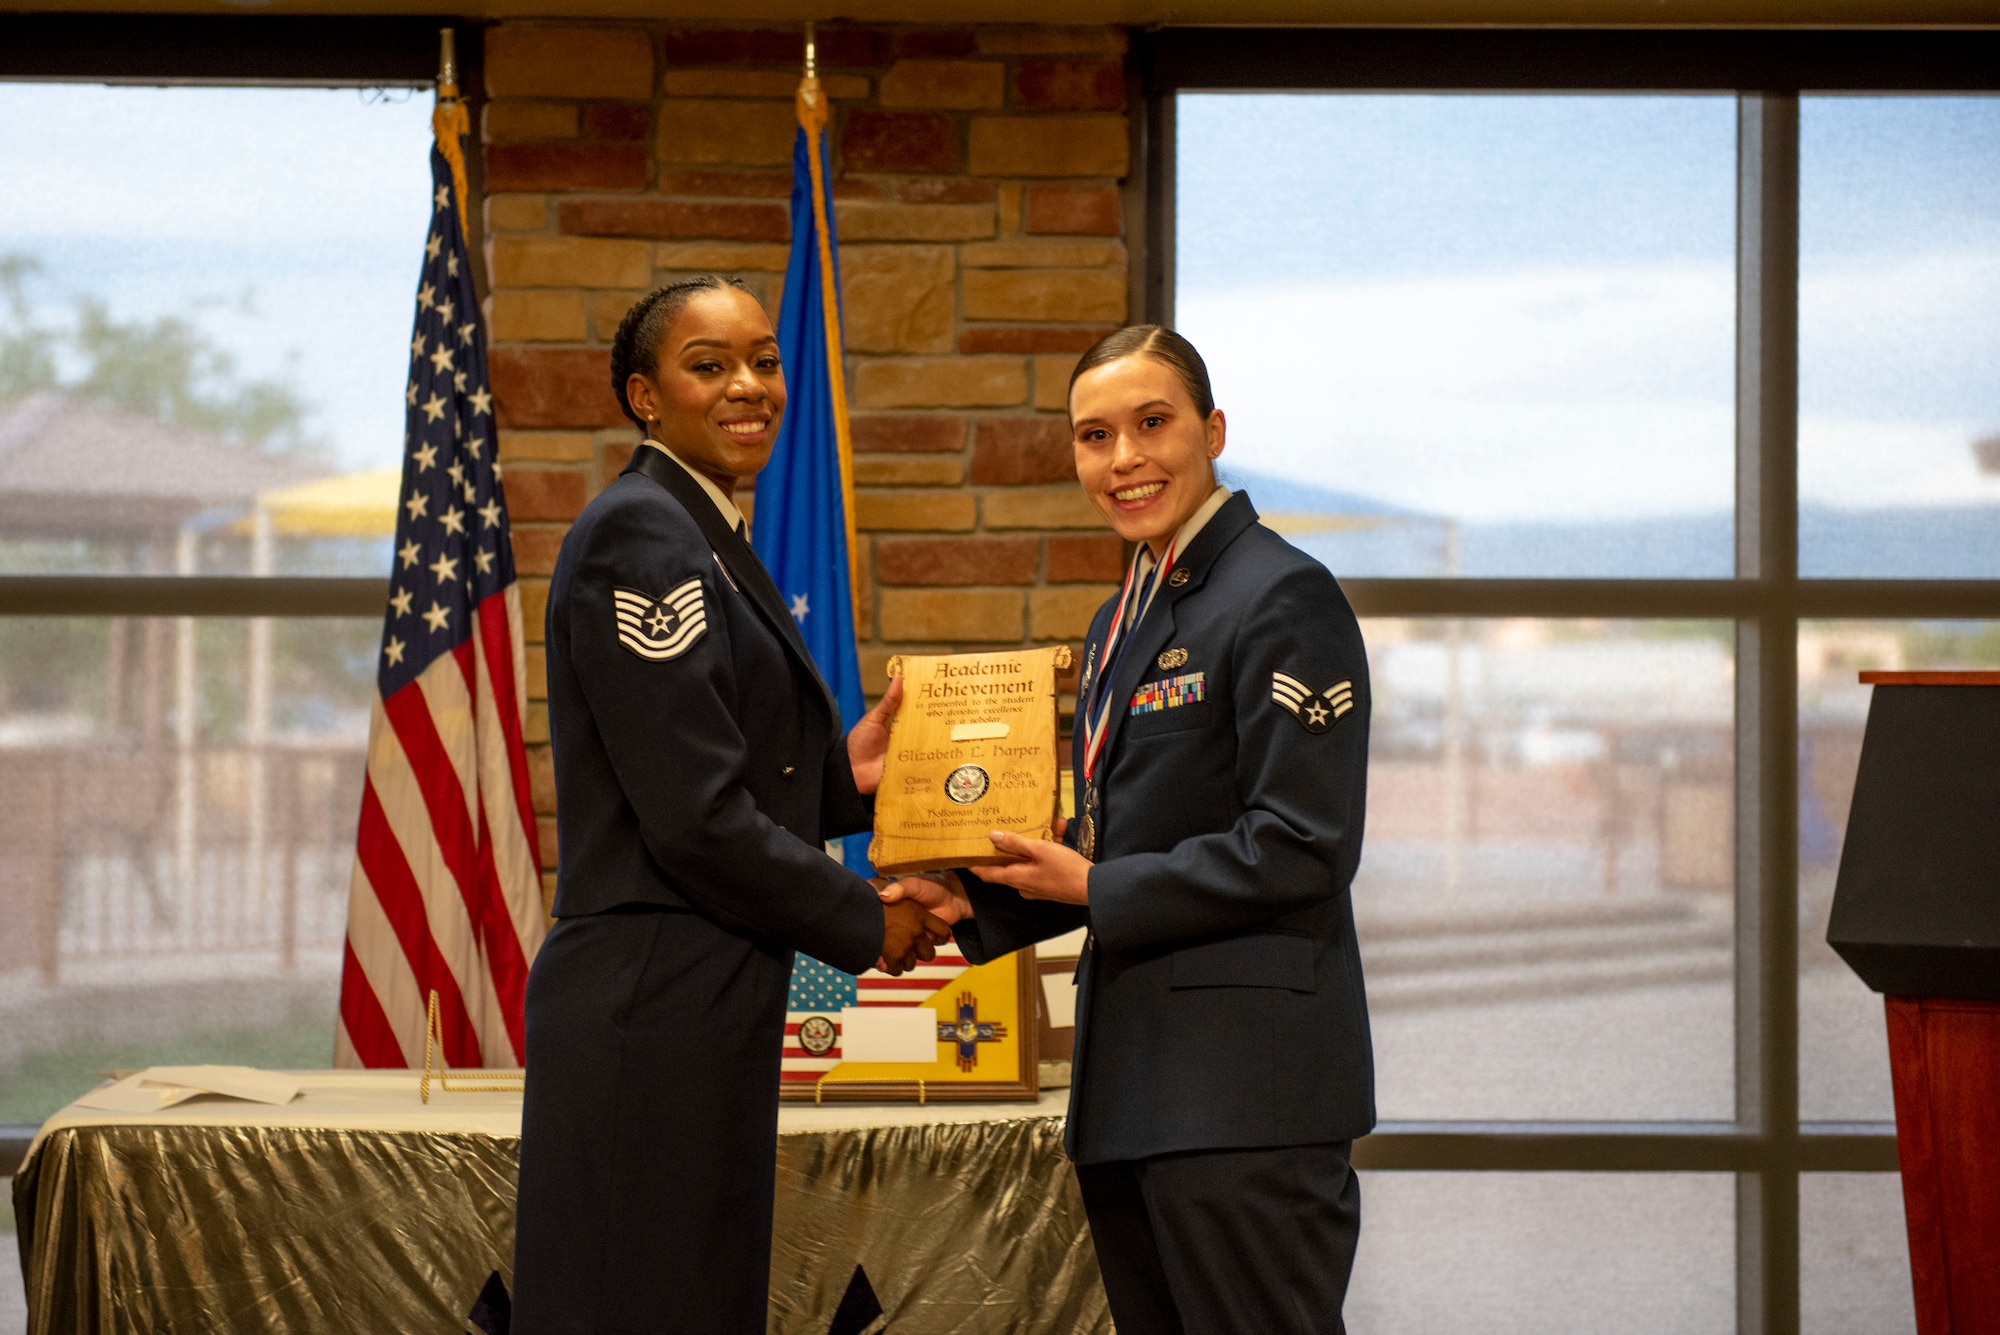 Senior Airman Elizabeth L. Harper, Airman Leadership School graduate, accepts the Academic Achievement Award from Tech Sgt. Shondra Nichols, 49th Force Support Squadron professional military education instructor, during the graduation of ALS class 22-6, July 7, 2022, on Holloman Air Force Base, New Mexico.